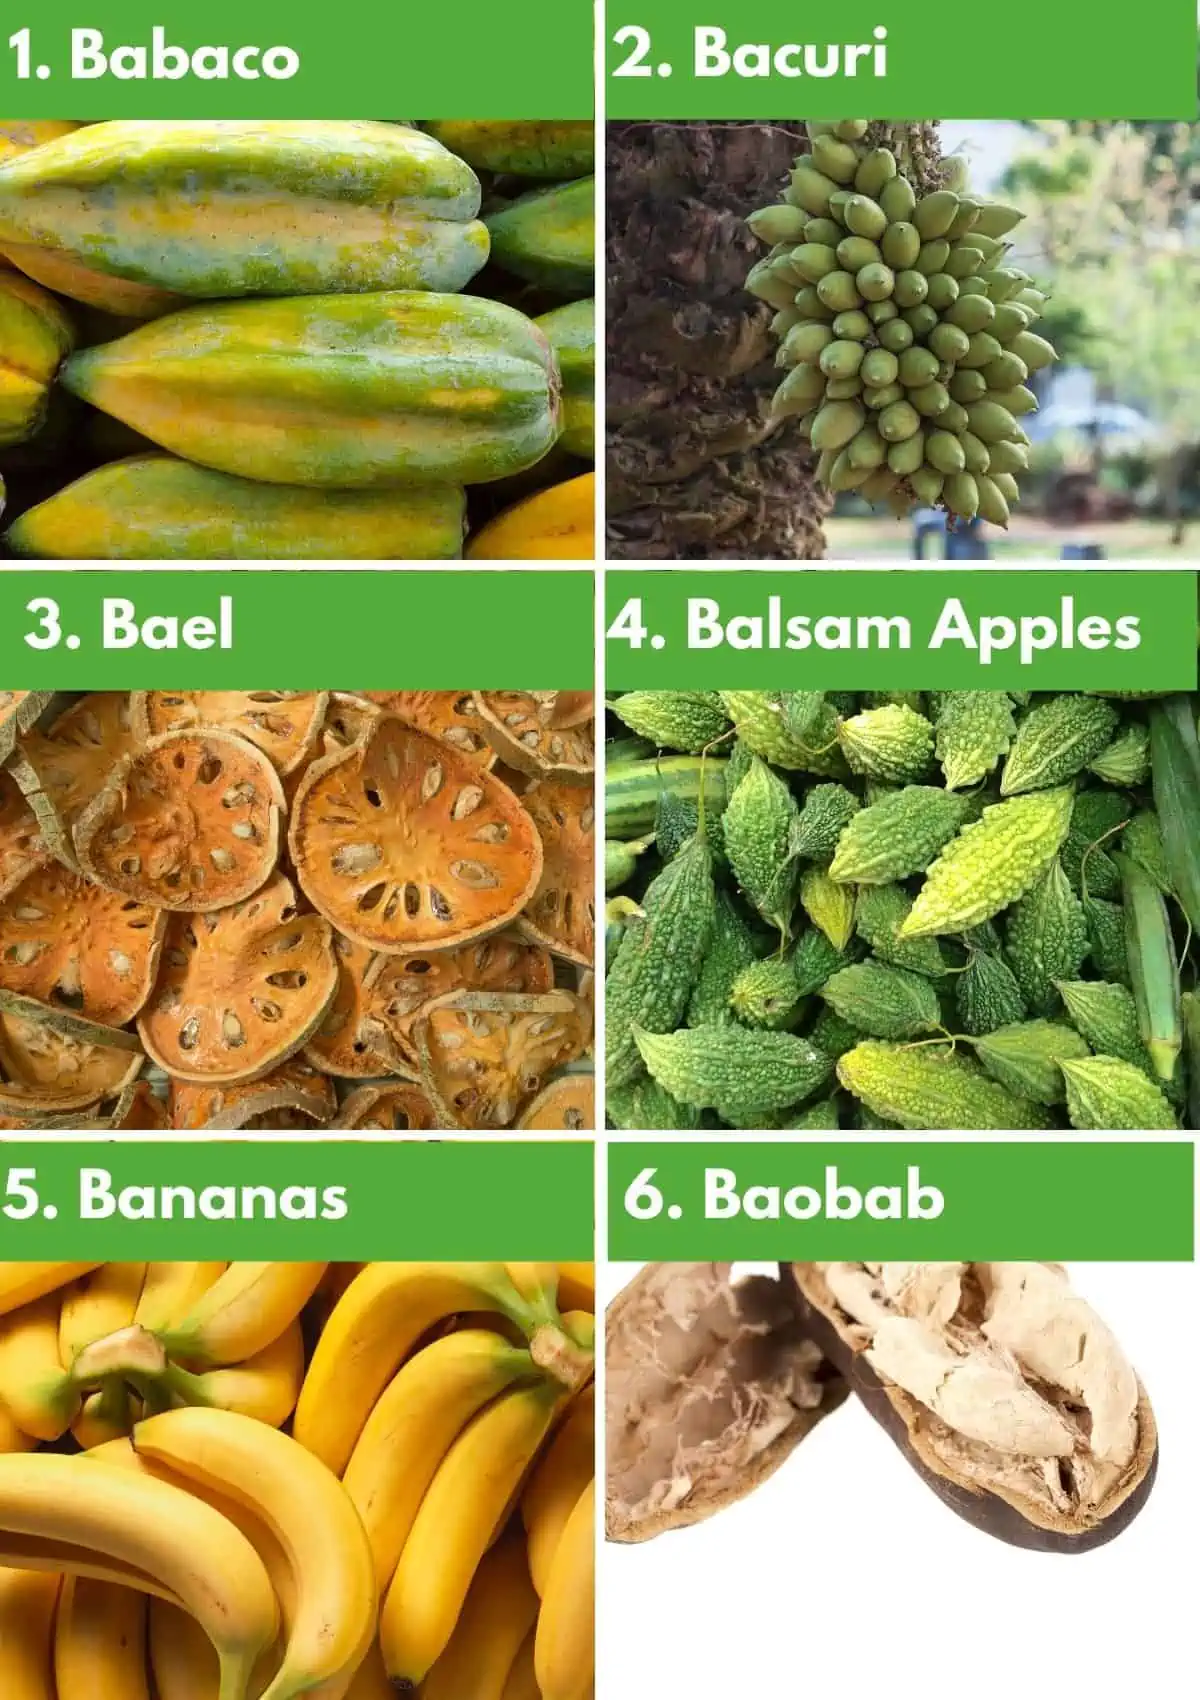 Collage of fruits that start with B: babaco, bacuri, bael, balsam apples, bananas, baobab. 